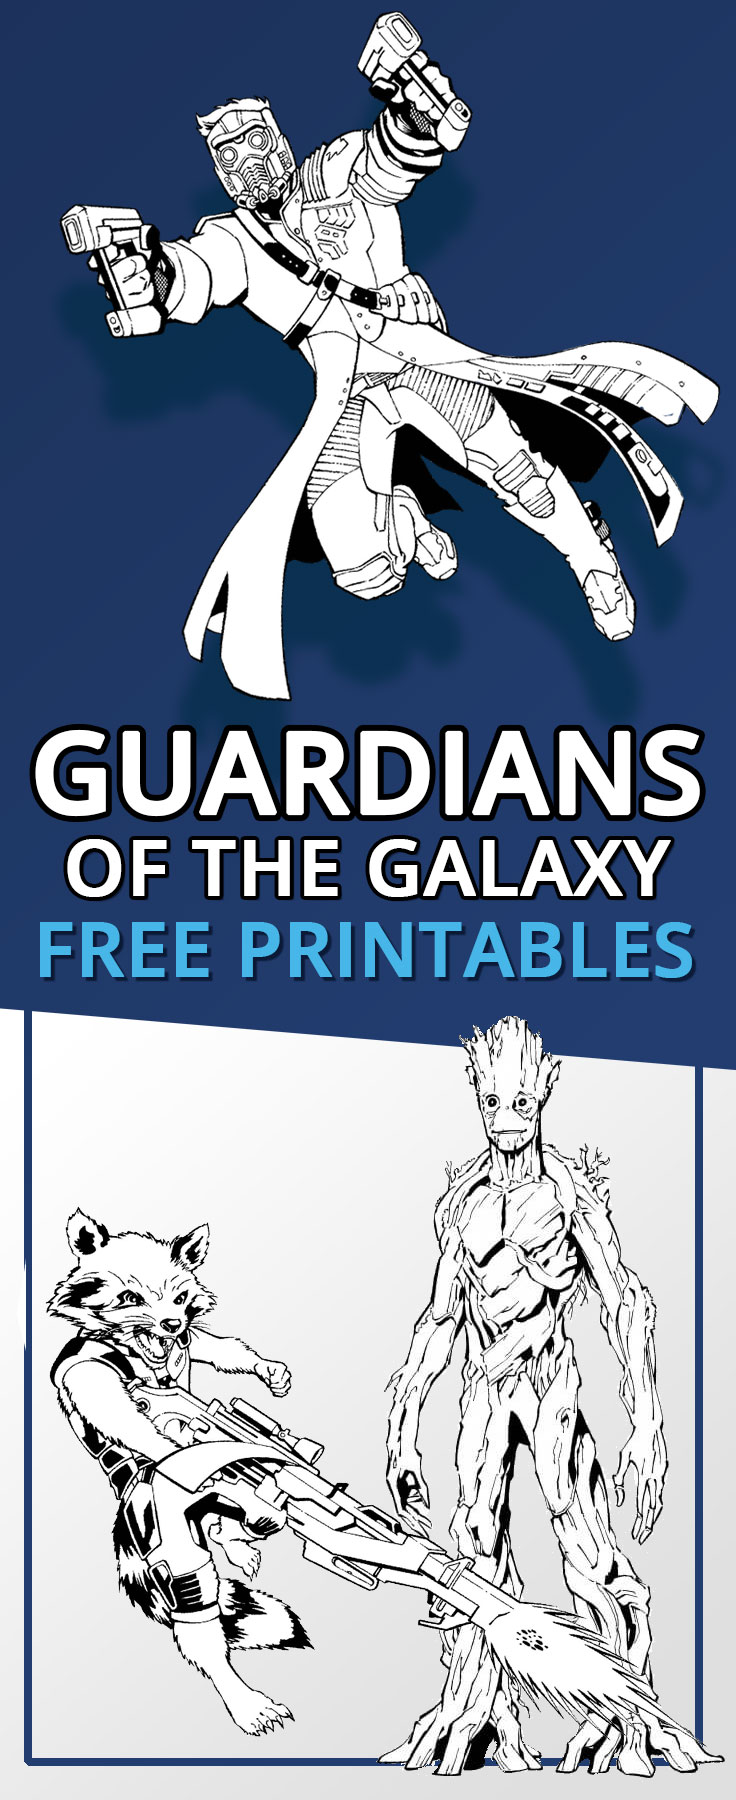 Guardians of FREE the printables Galaxy